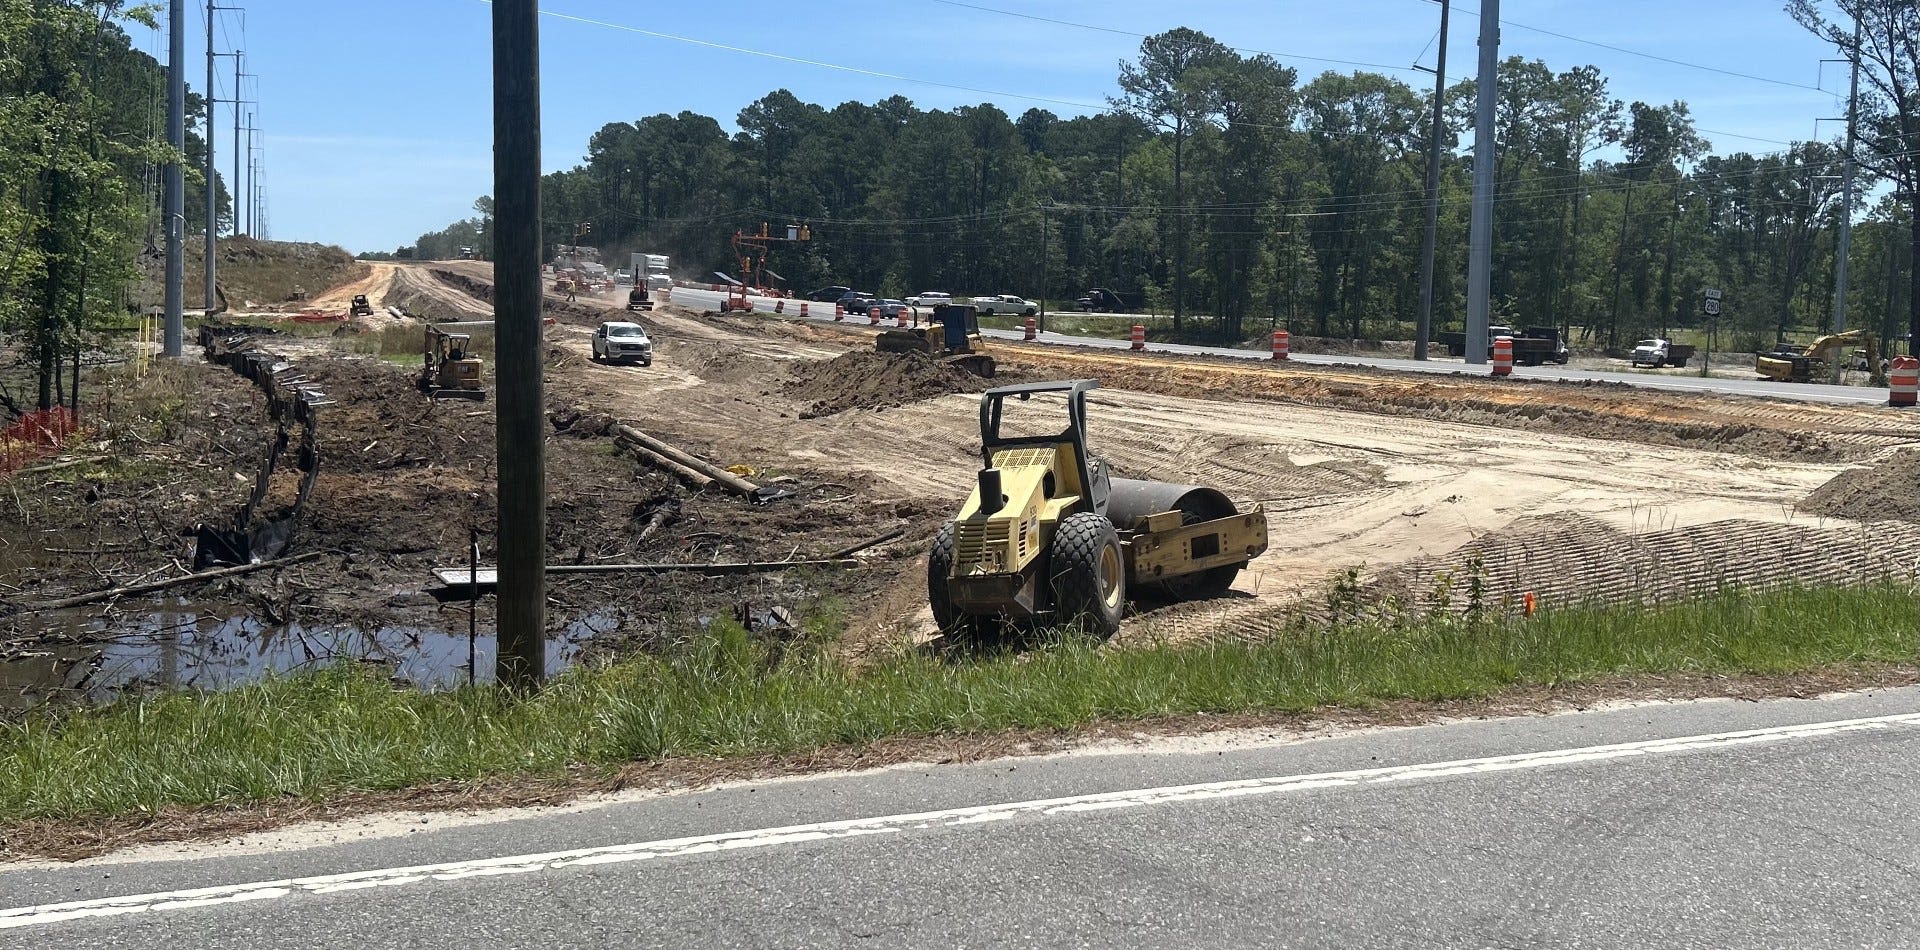 Construction of frontage road, roundabouts and widening of US 280 underway in North Bryan